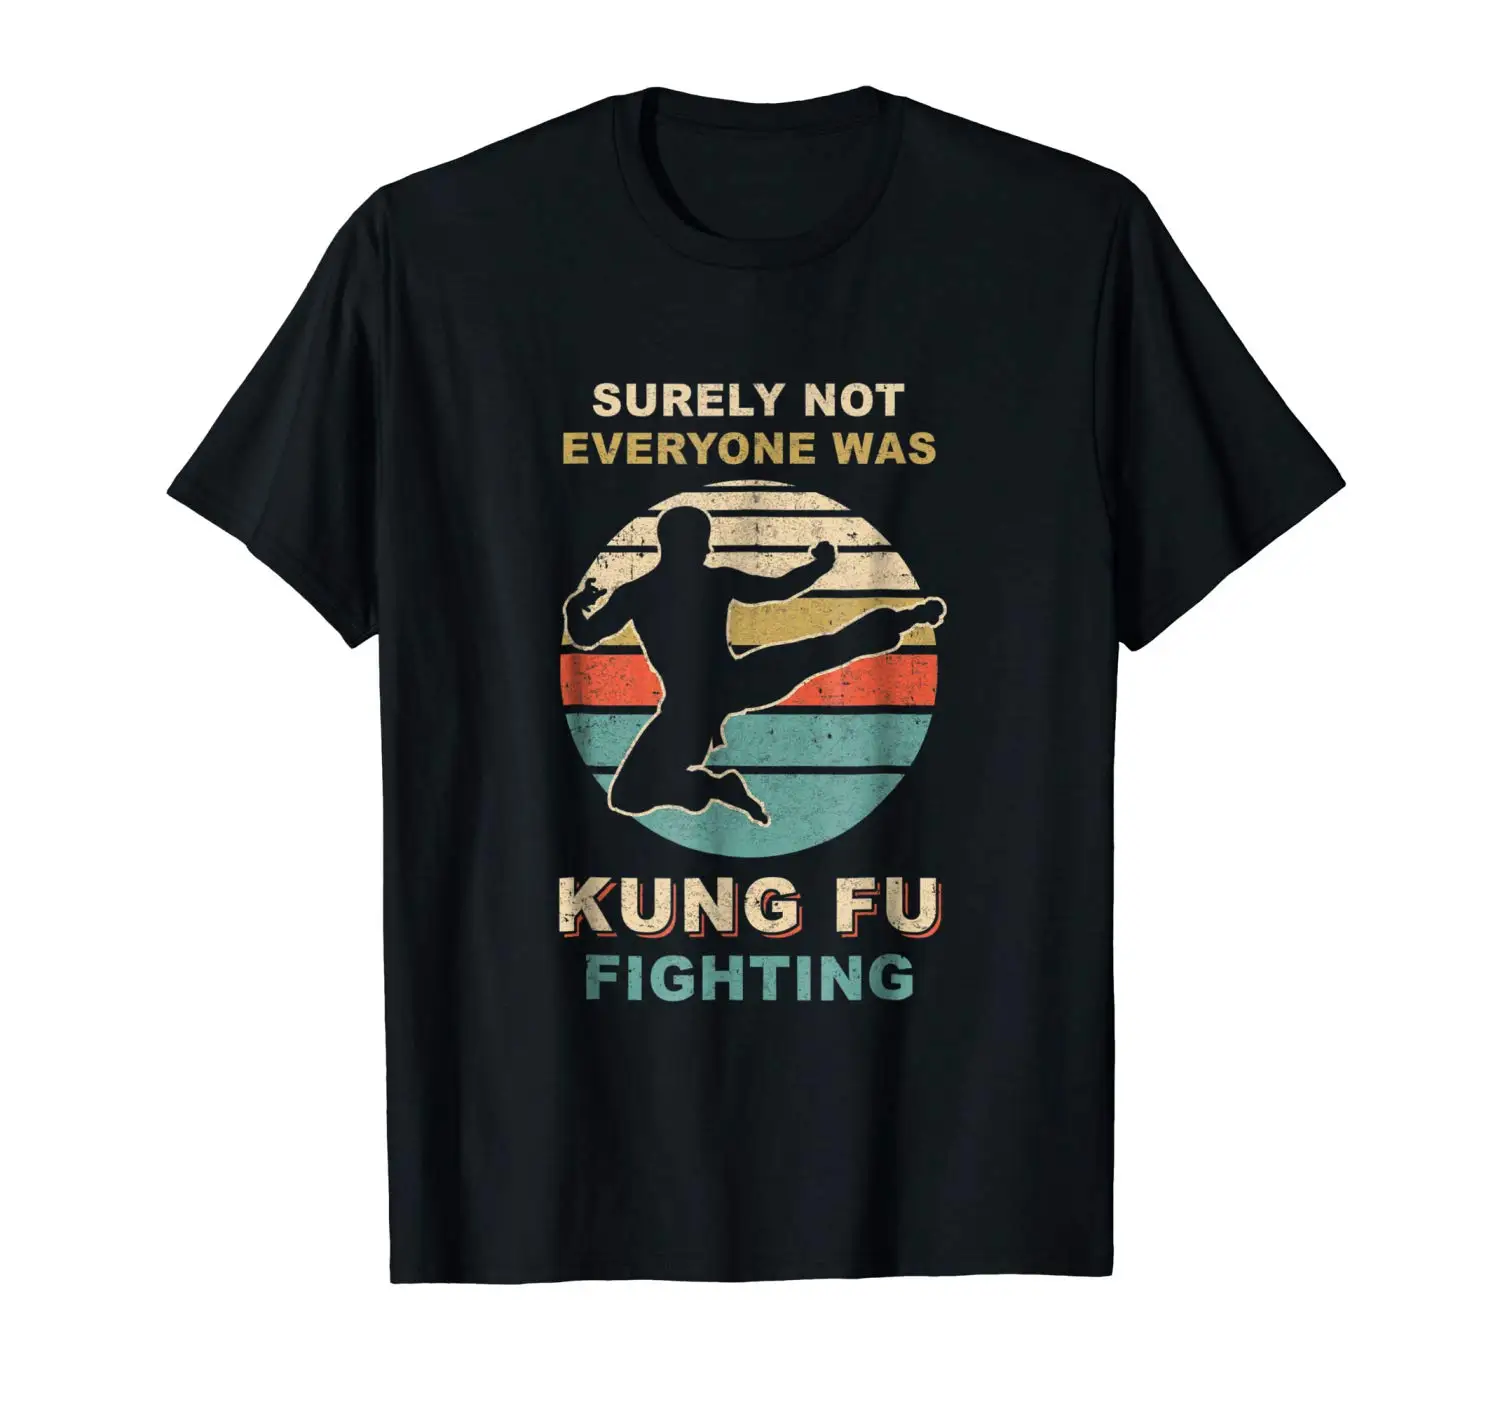 

Vintage Surely Not Everyone Was Kung Fu Fighting T-Shirt Short Sleeve Cheap Sale Cotton T Shirt Fashion Men Top Tee